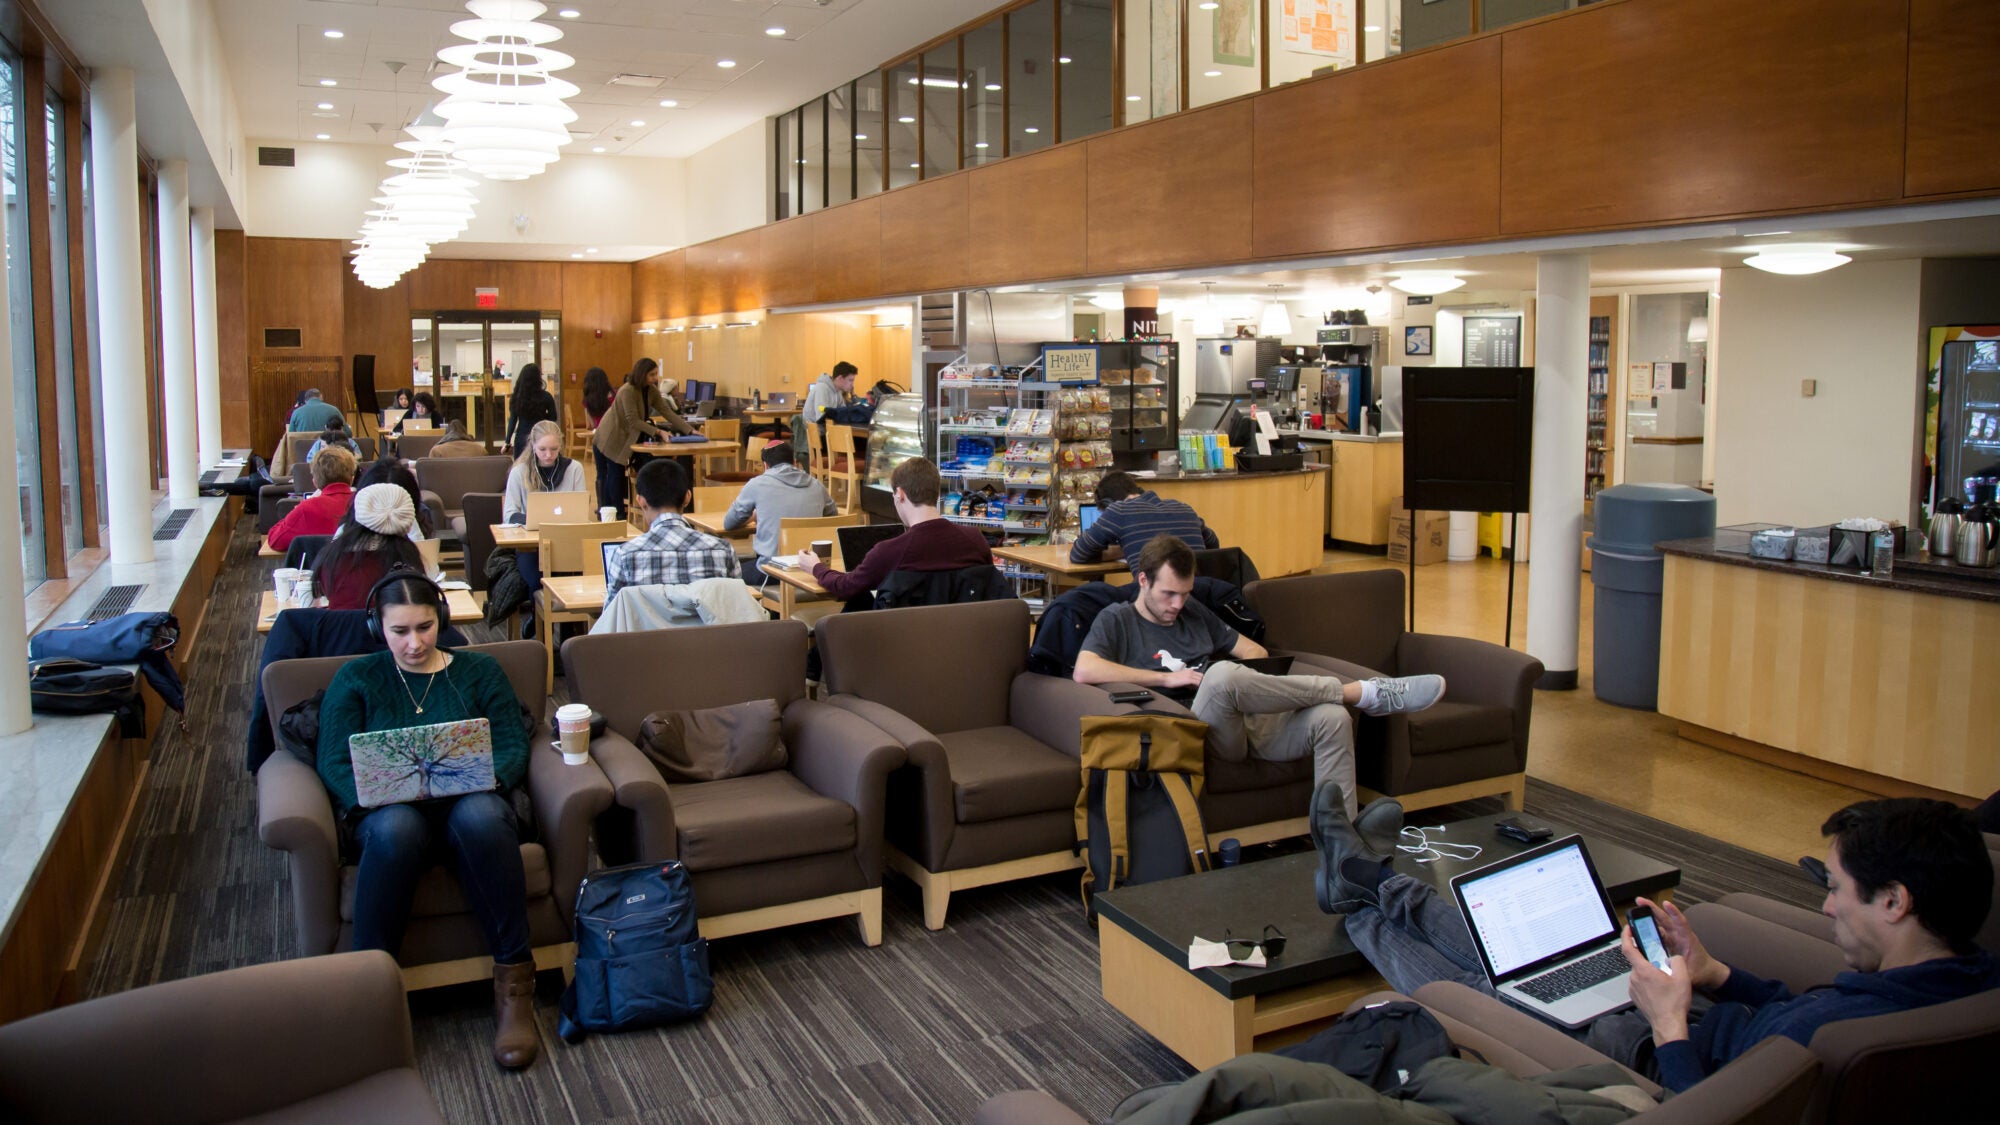 A room filled with students sitting on couches studying.